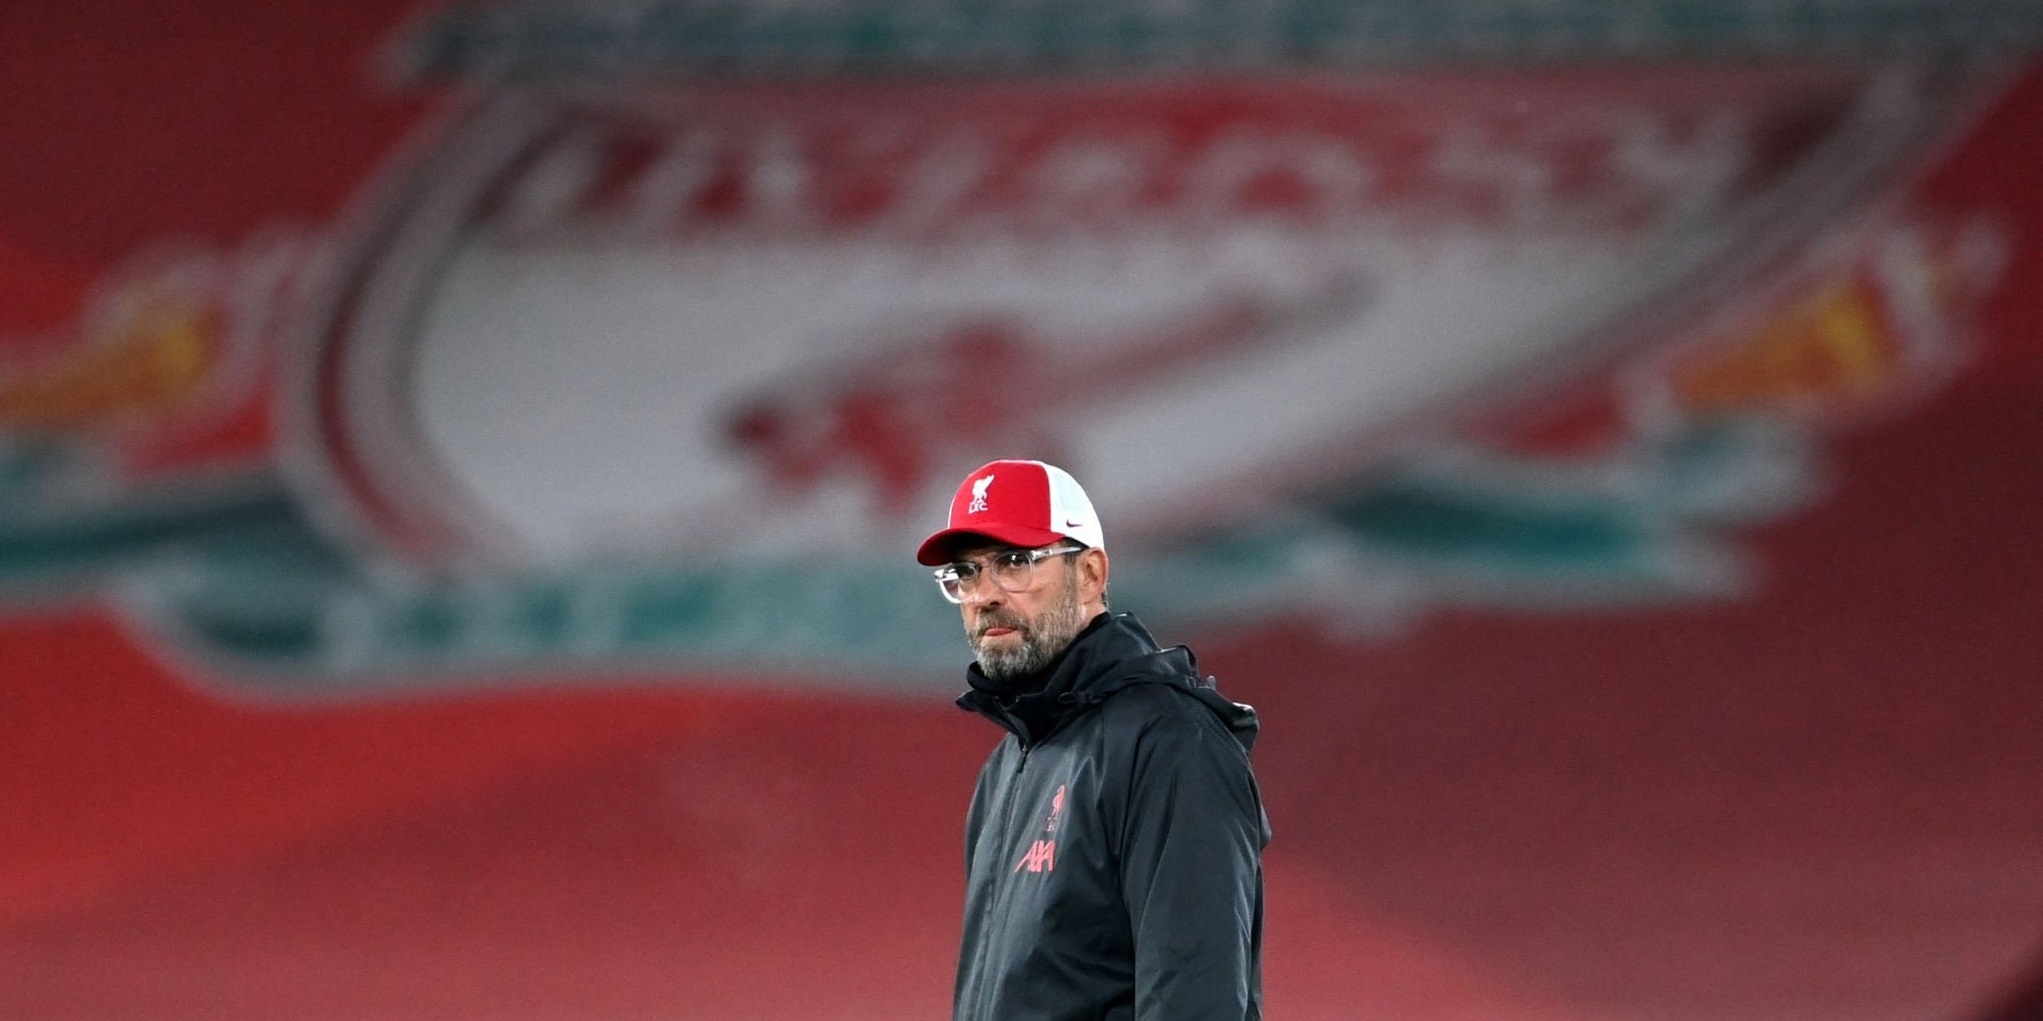 ‘When the contract in Liverpool ends…’ – Klopp mentions club role when questioned on possibility of managing Germany